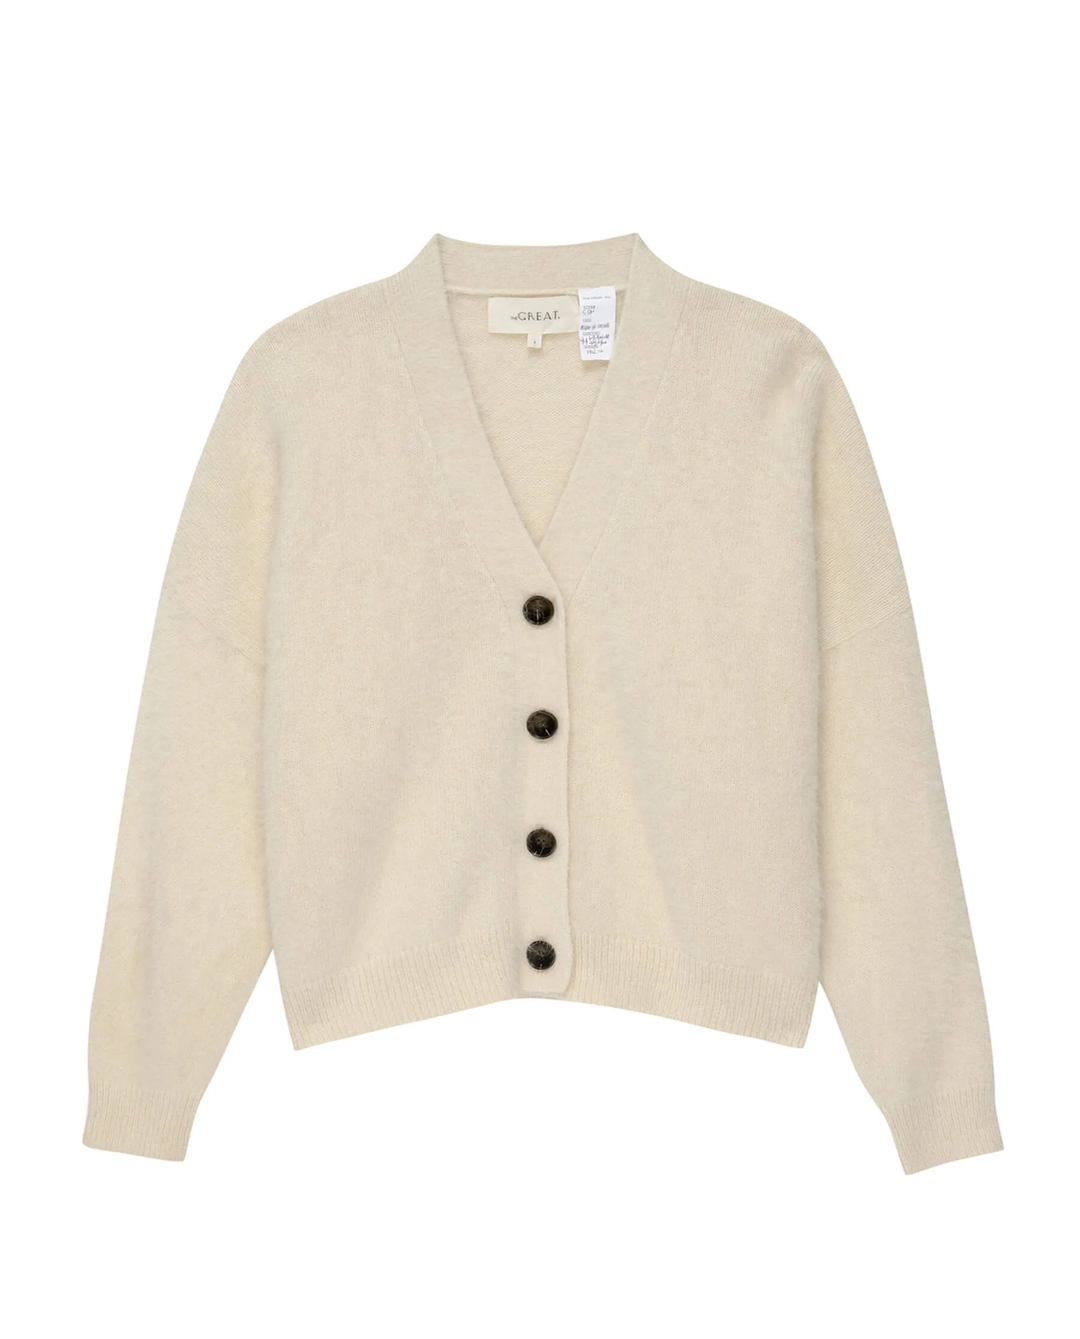 The Great - The Fluffy Slouch Cardigan in Cream